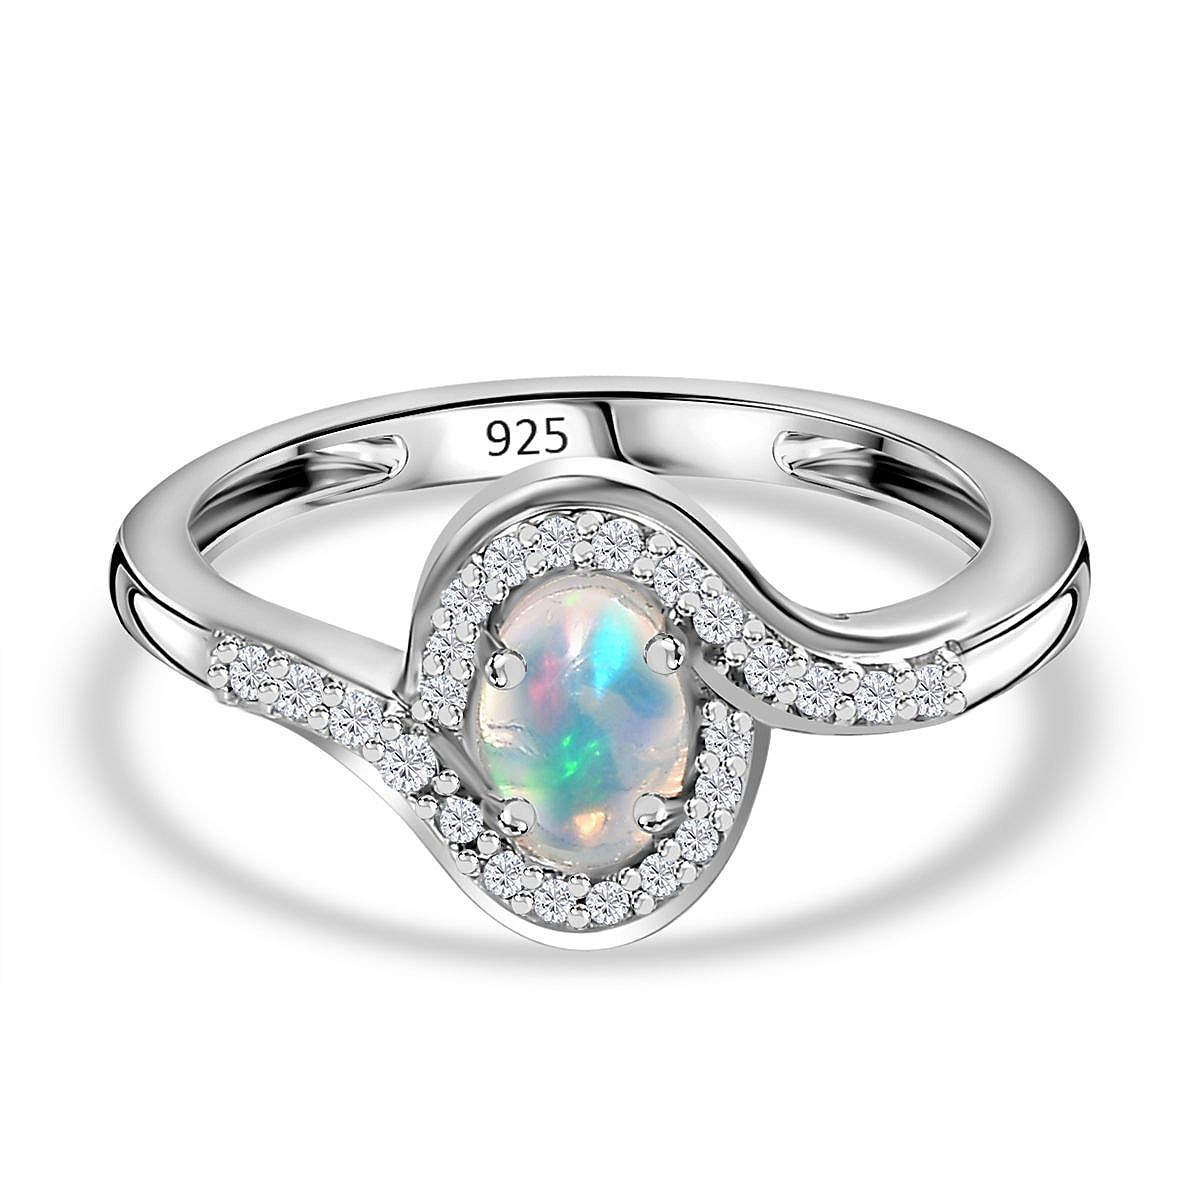 Ethiopian Welo Opal & Natural Zircon Bypass Ring in Platinum Overlay Sterling Silver